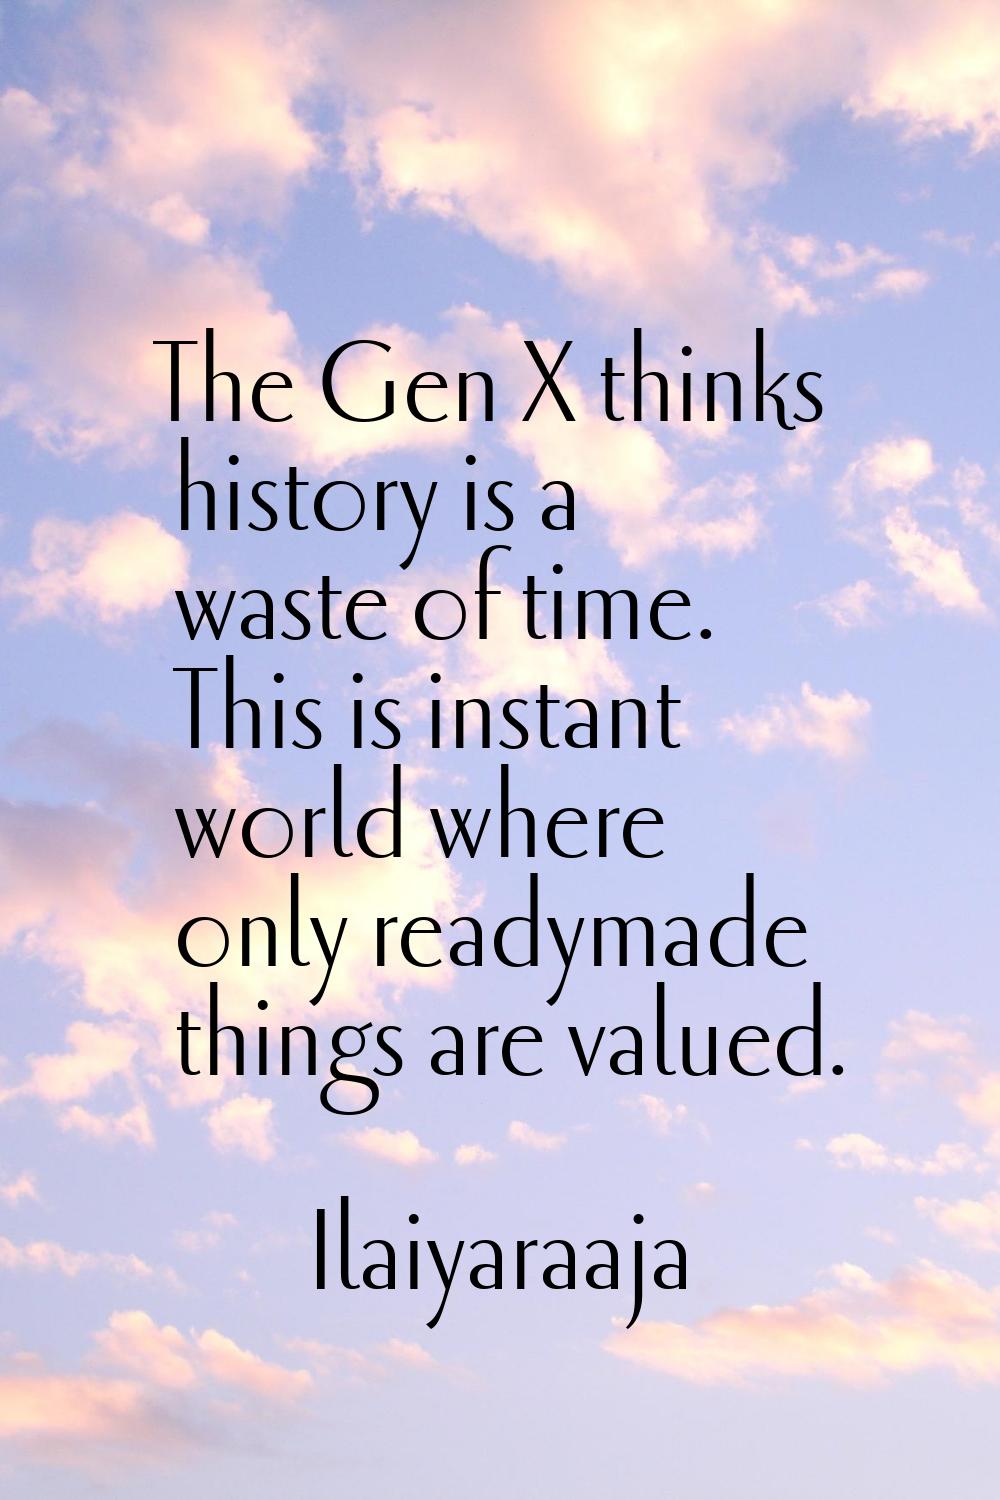 The Gen X thinks history is a waste of time. This is instant world where only readymade things are 